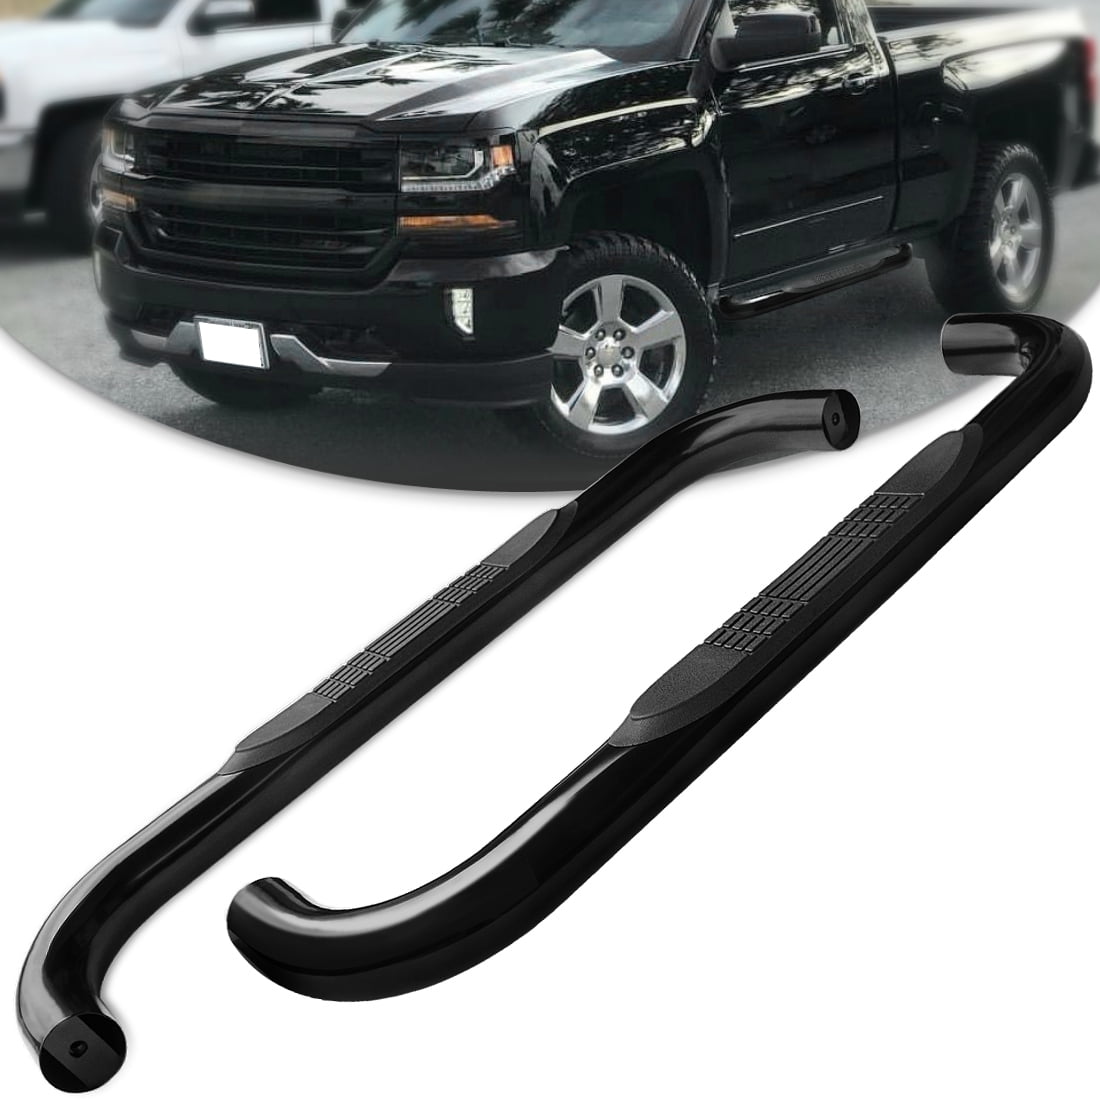 Fit 99-16 Chevy Silverado Double Cab 5" Running Boards Side Step Nerf Bar Oval